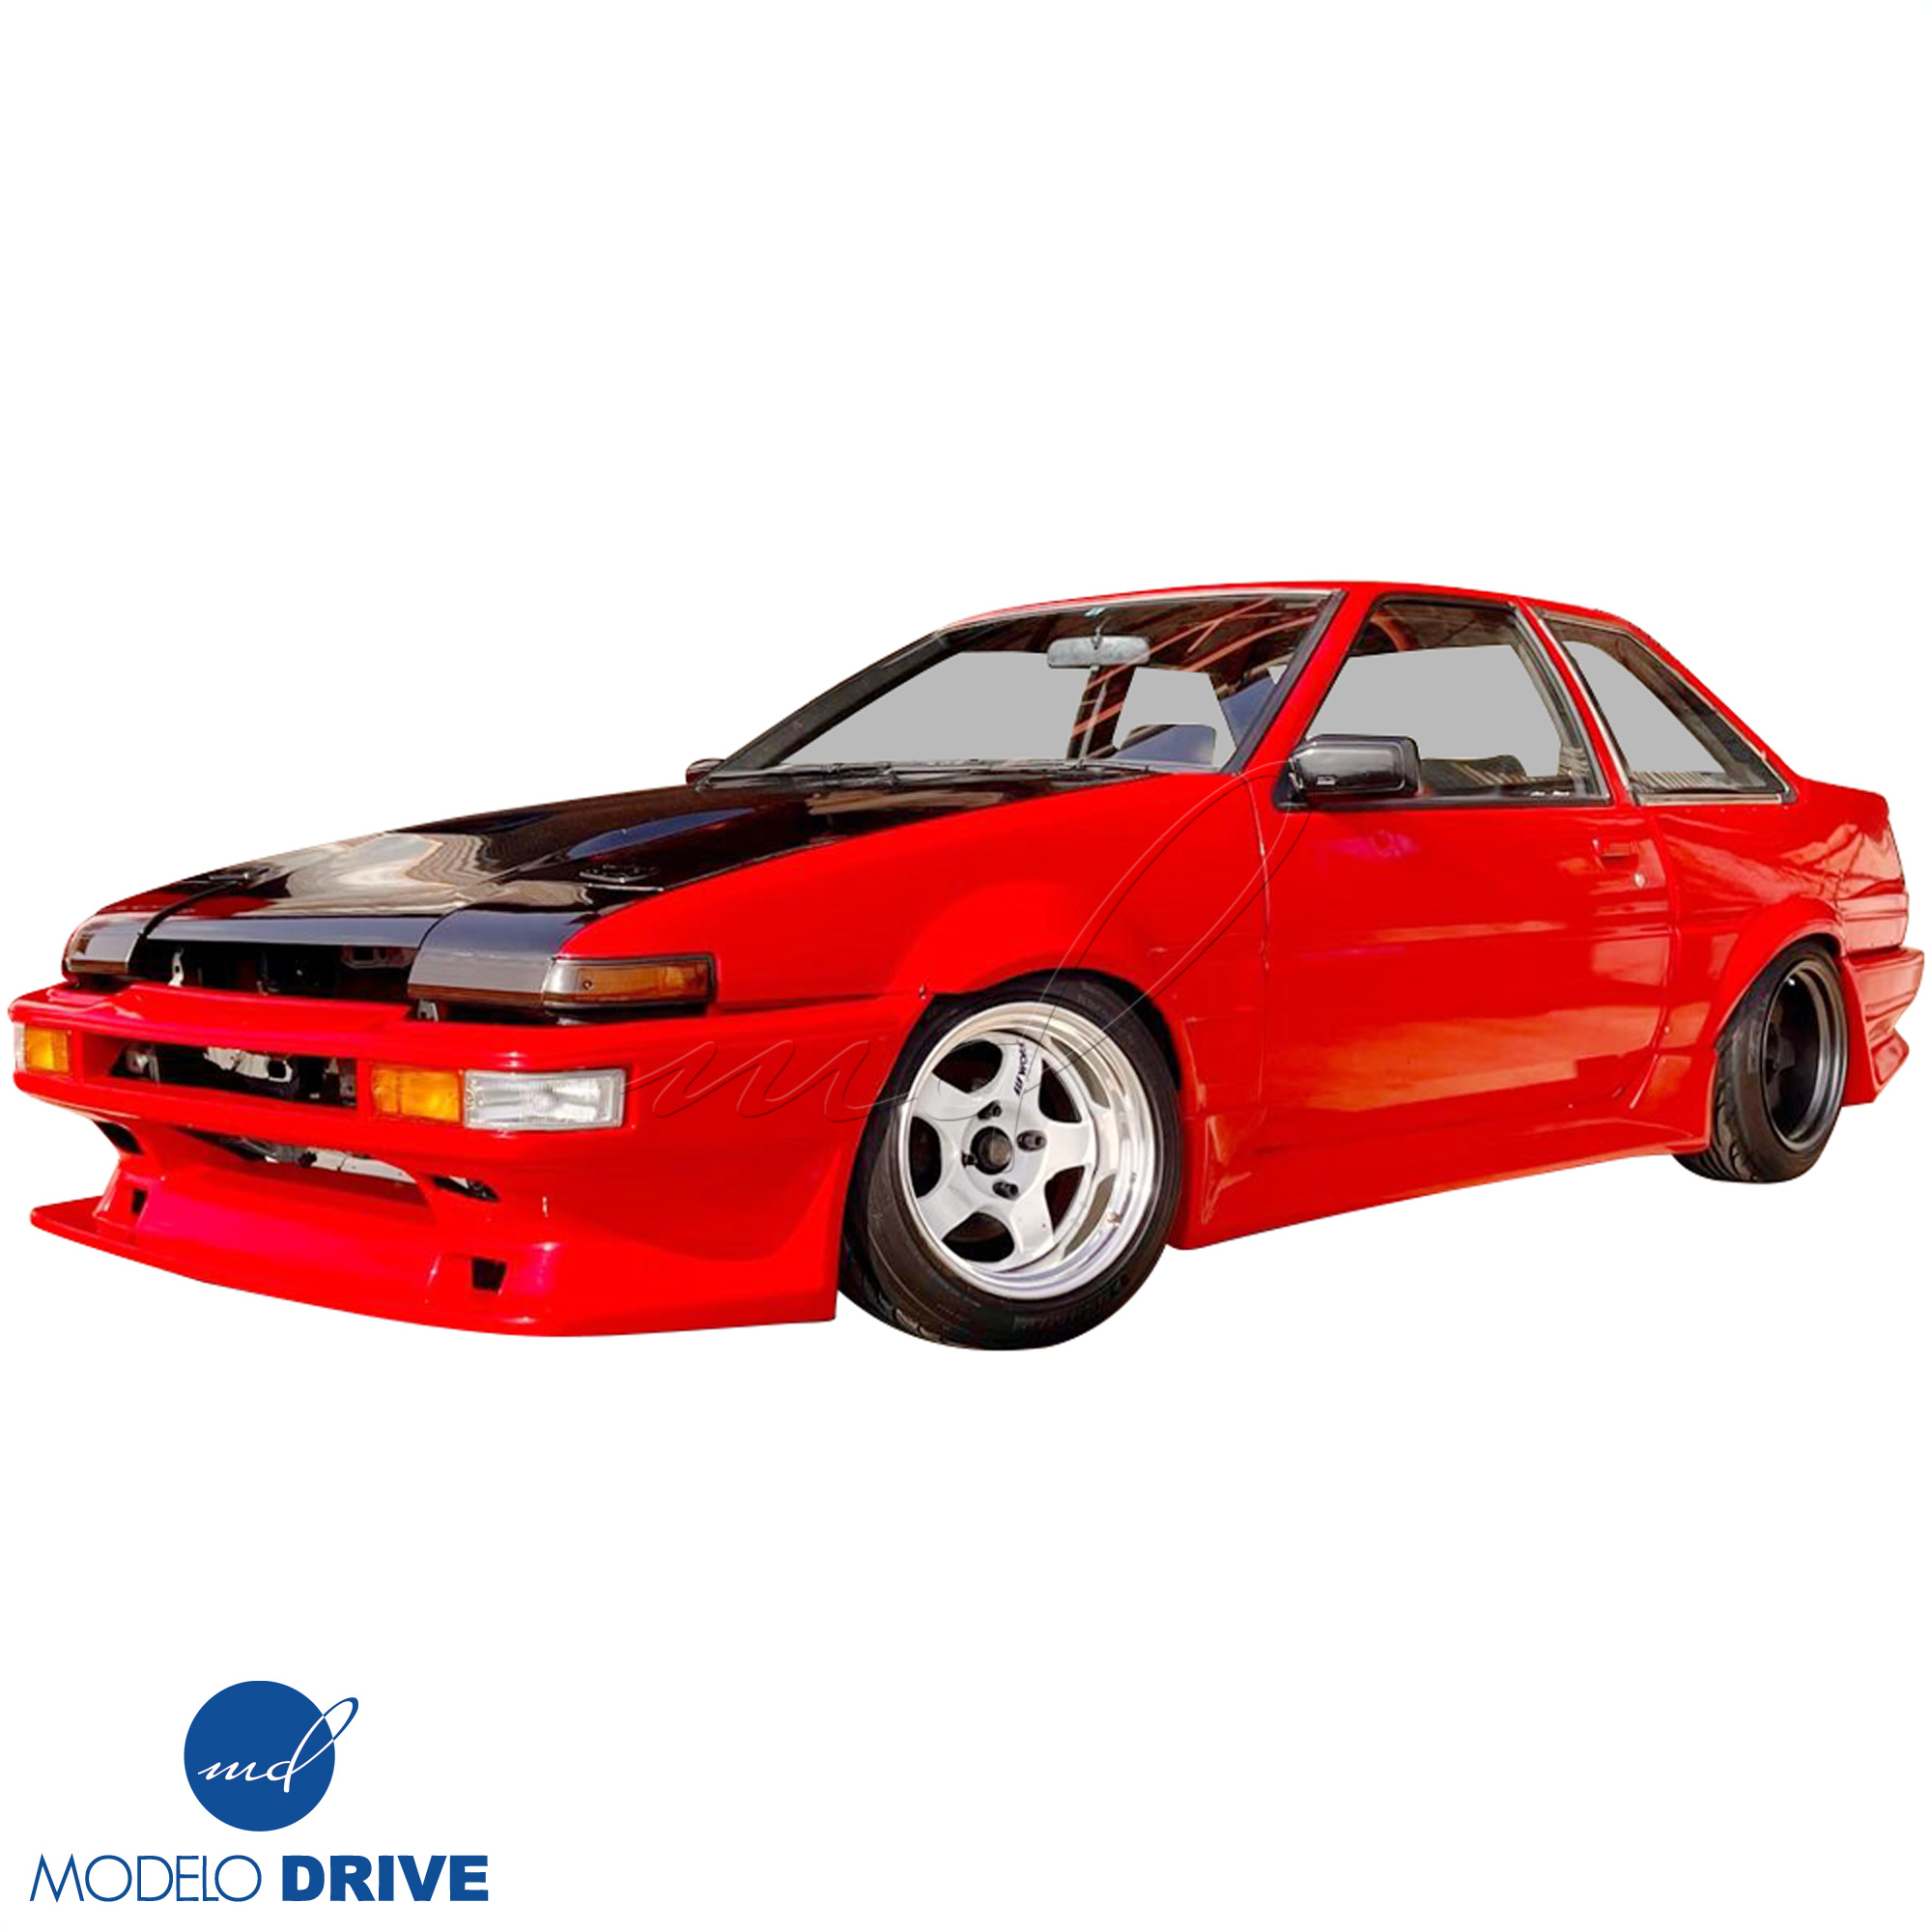 ModeloDrive FRP DMA Wide Body 40mm Fenders (rear) > Toyota Corolla AE86 1984-1987 > 2dr Coupe - Image 16